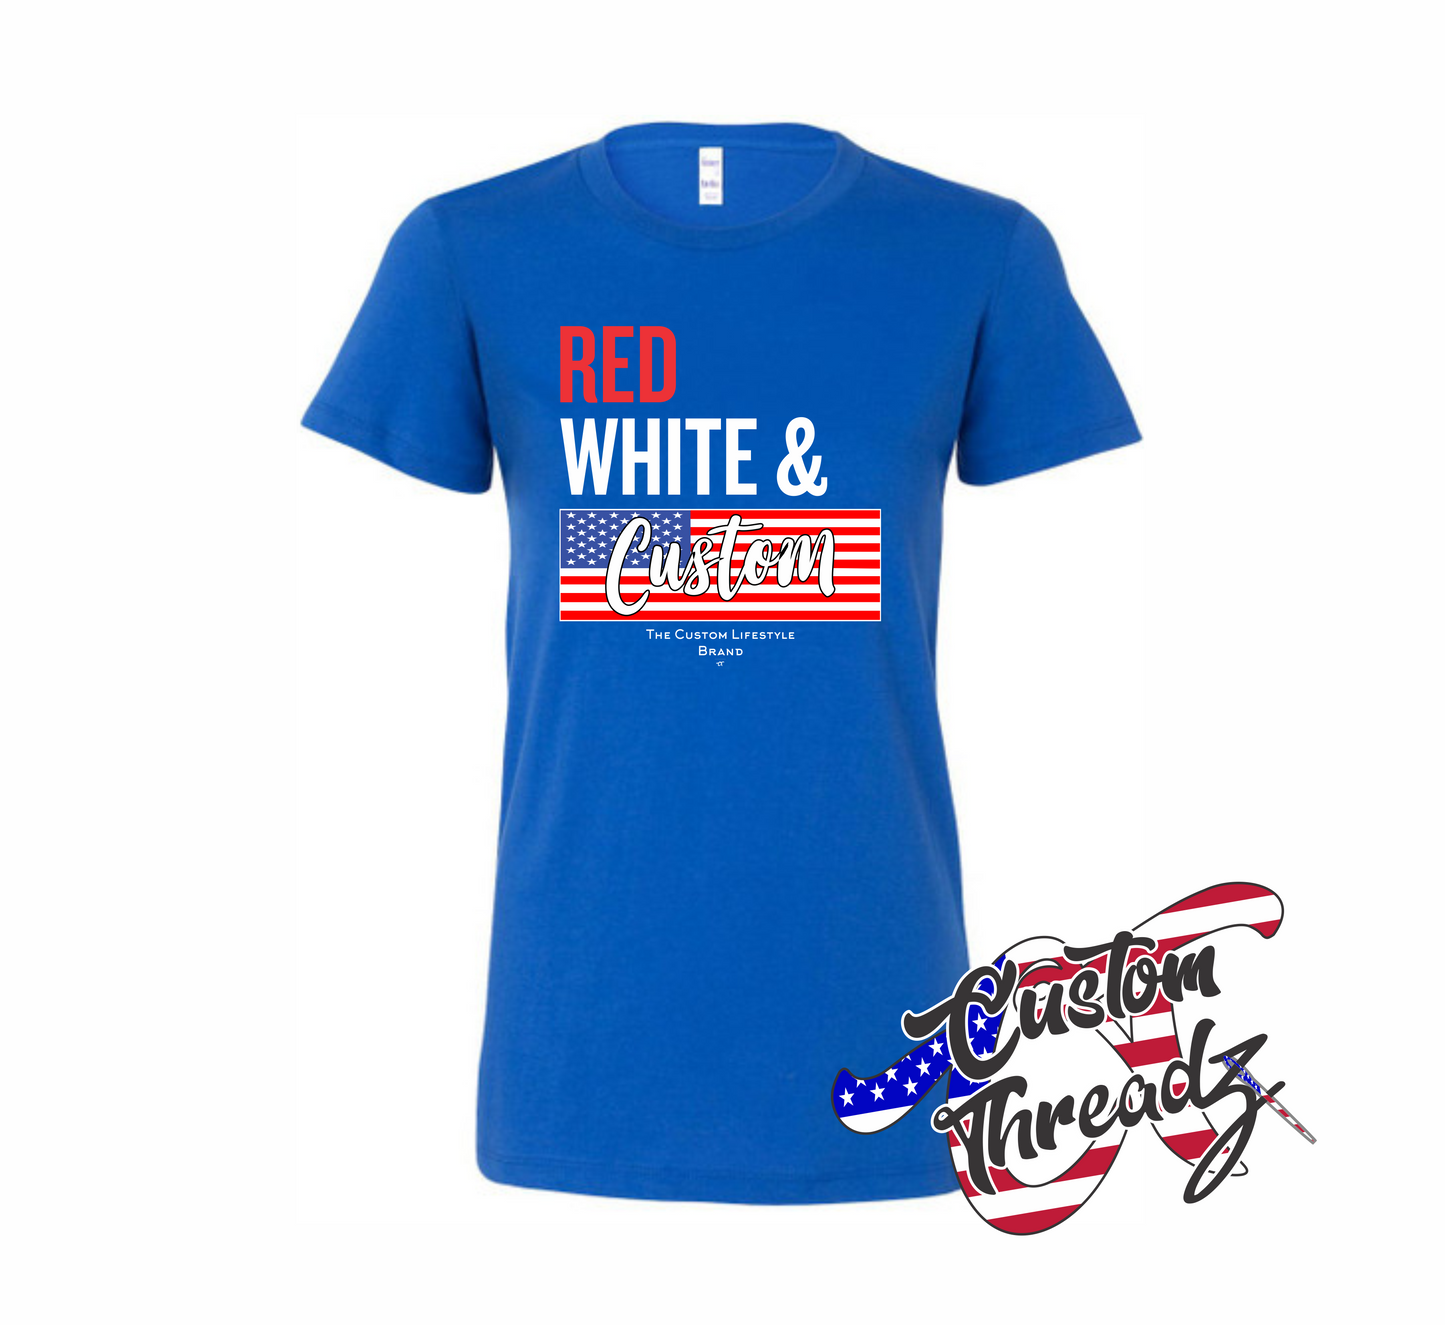 royal blue womens tee with red white and custom american flag DTG printed design